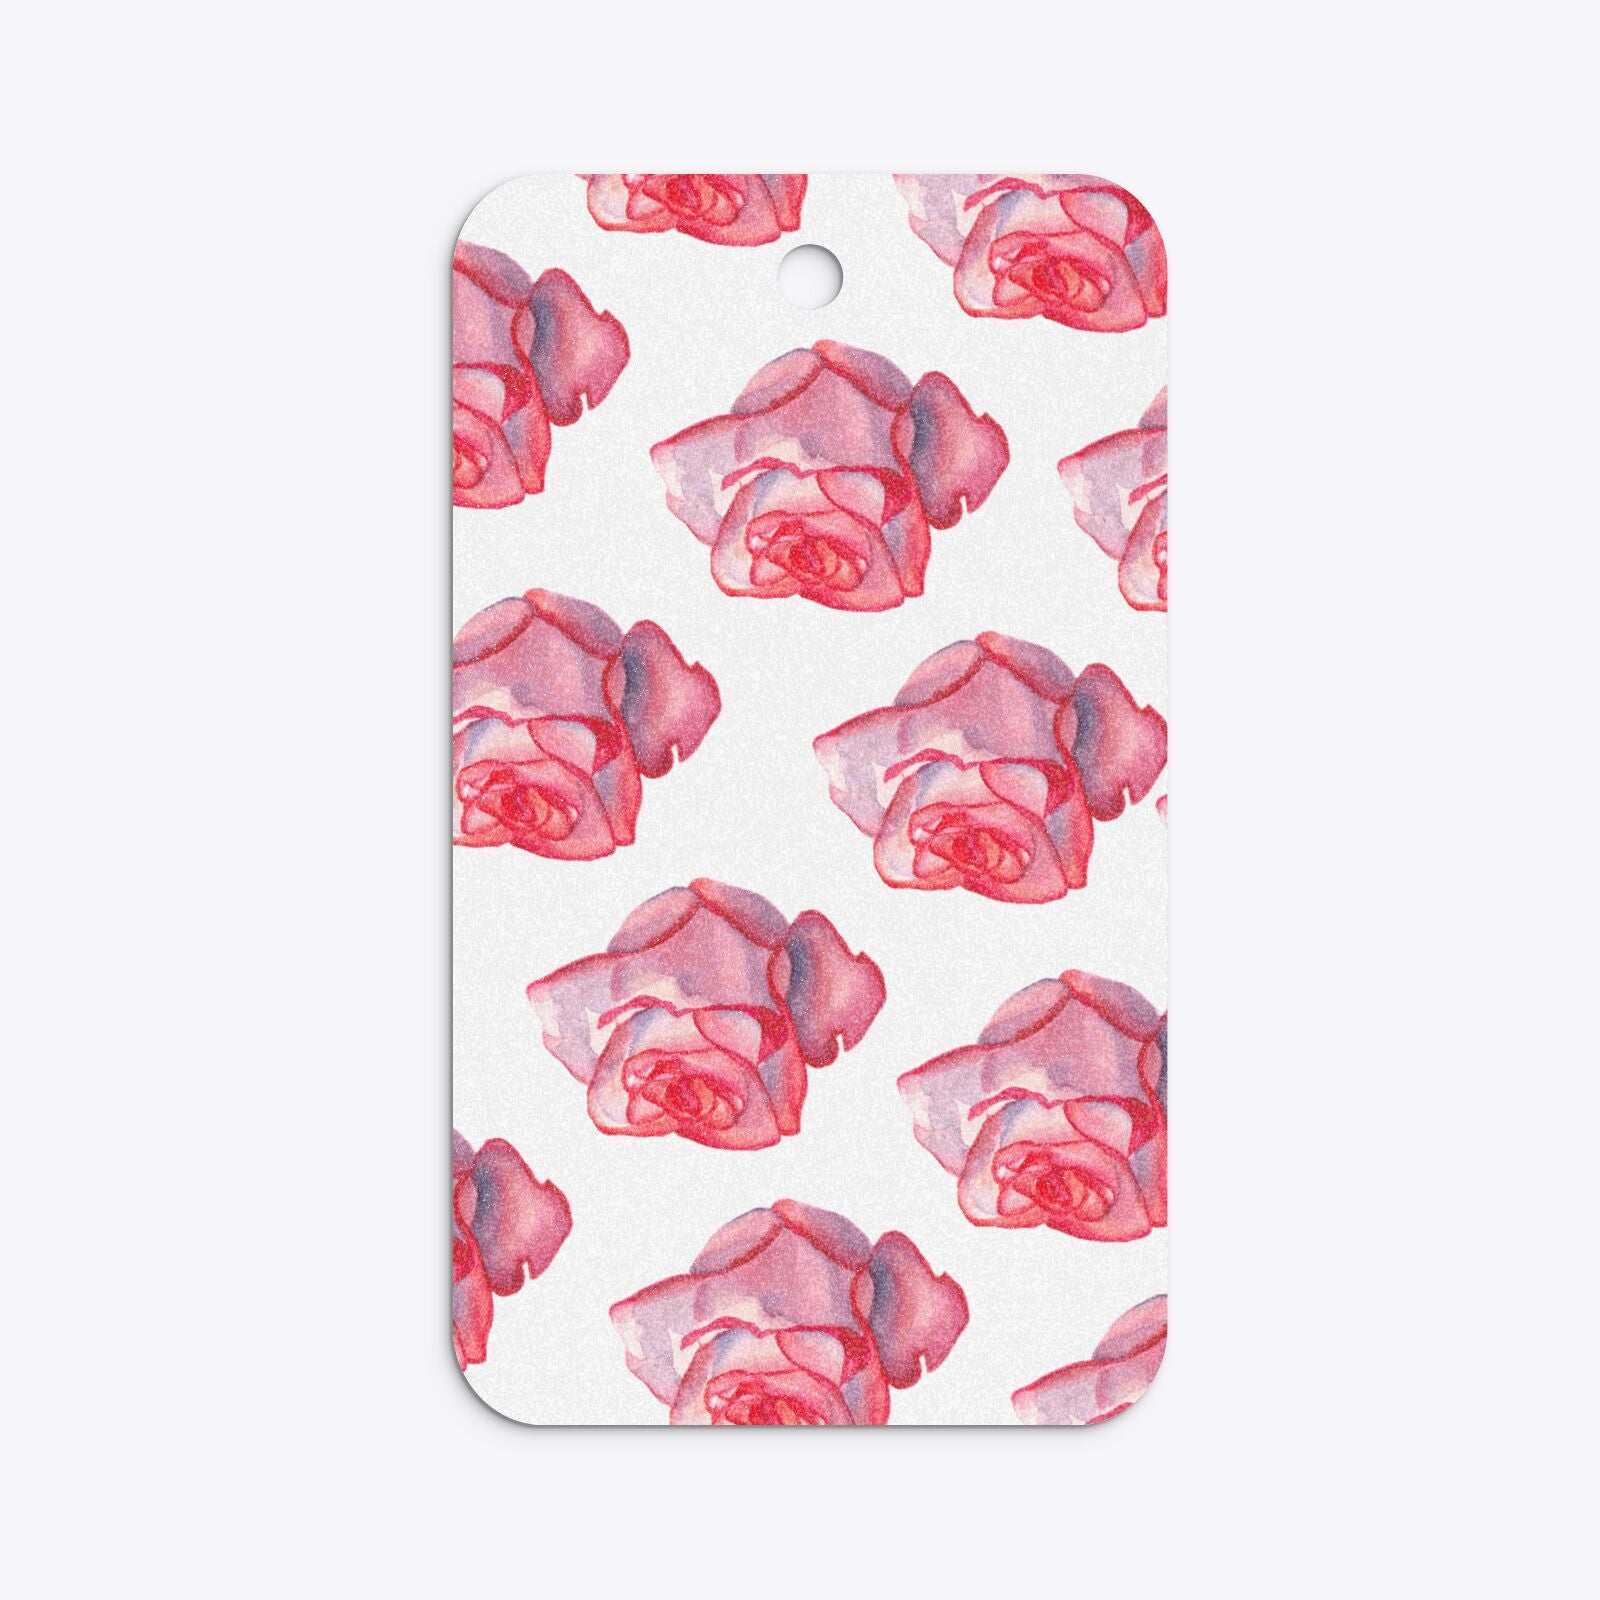 Pink Roses Rounded Rectangle Glitter Gift Tag